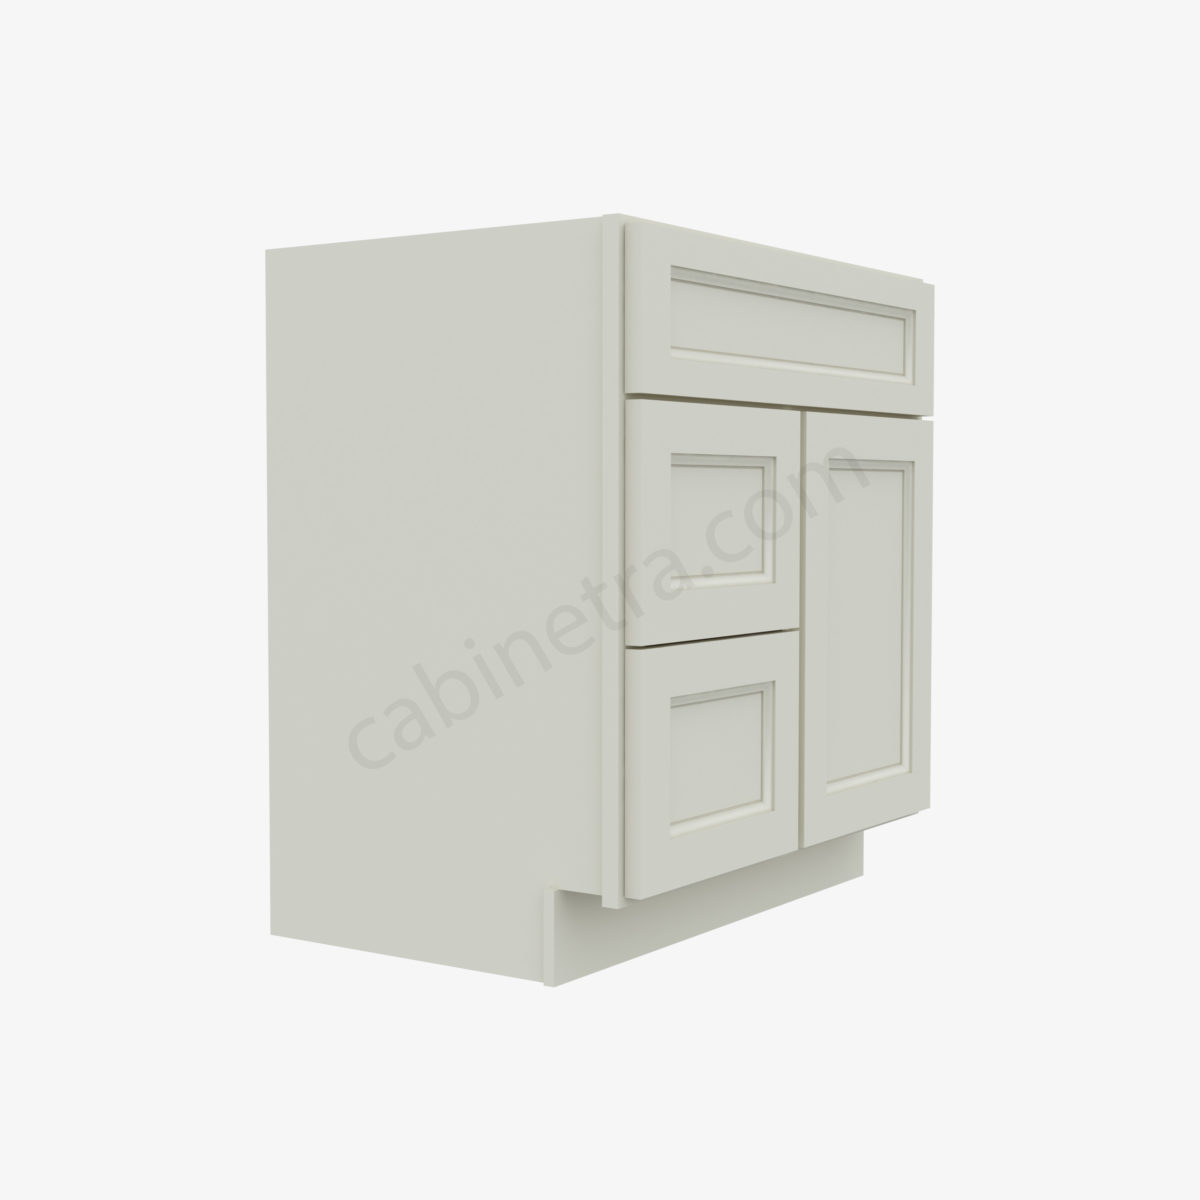 TQ S3021DL 34 4 Forevermark Townplace Crema Cabinetra scaled